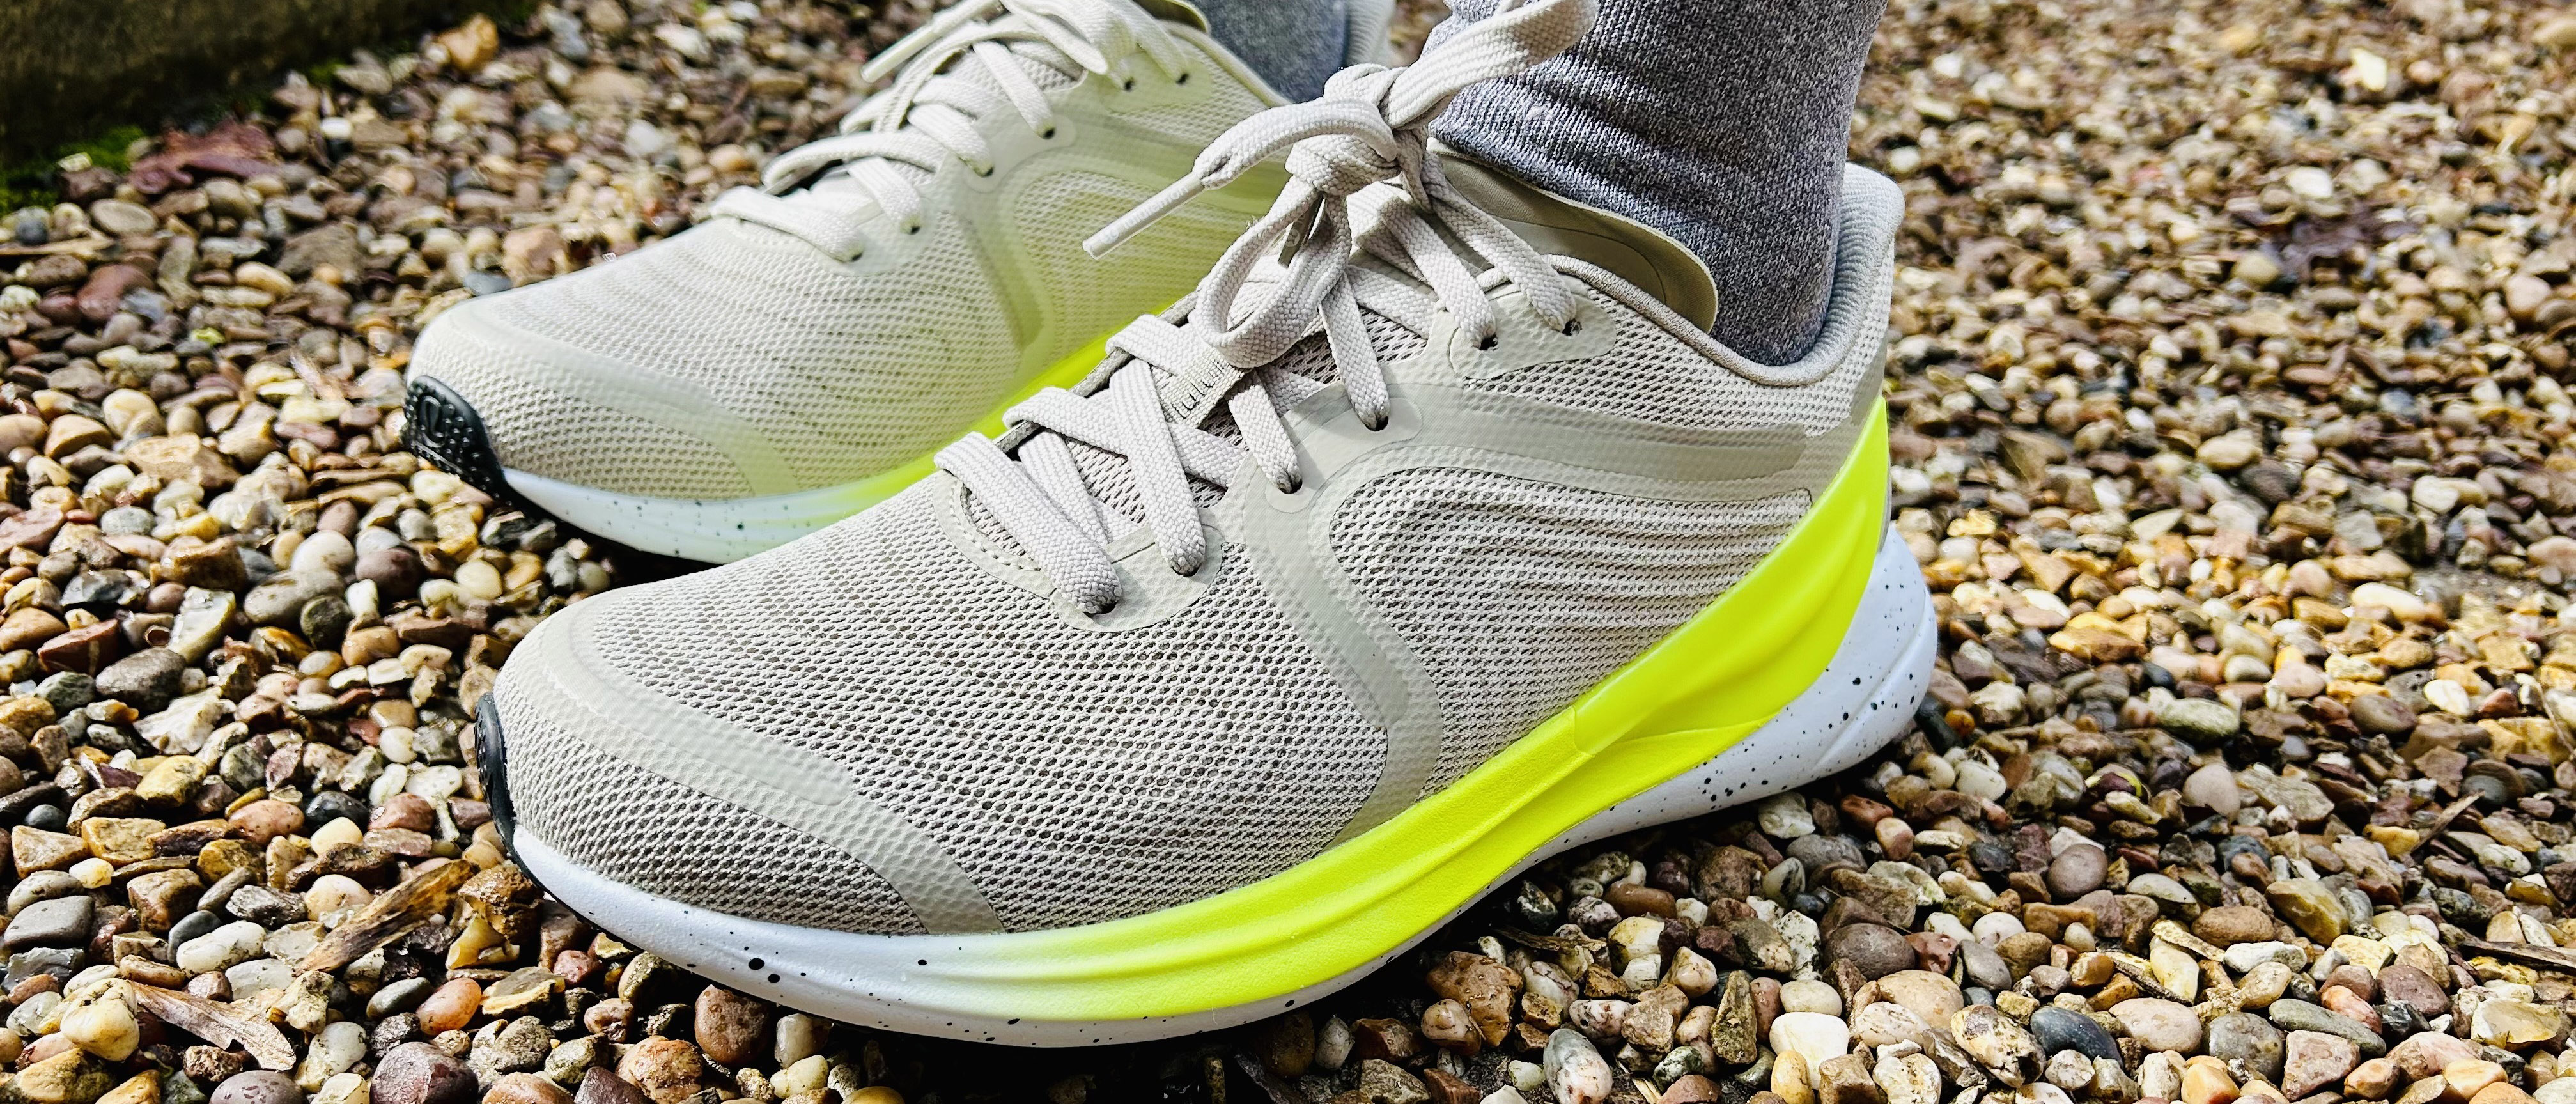 Lululemon Shoes Review: Lululemon makes outstanding shoes for any